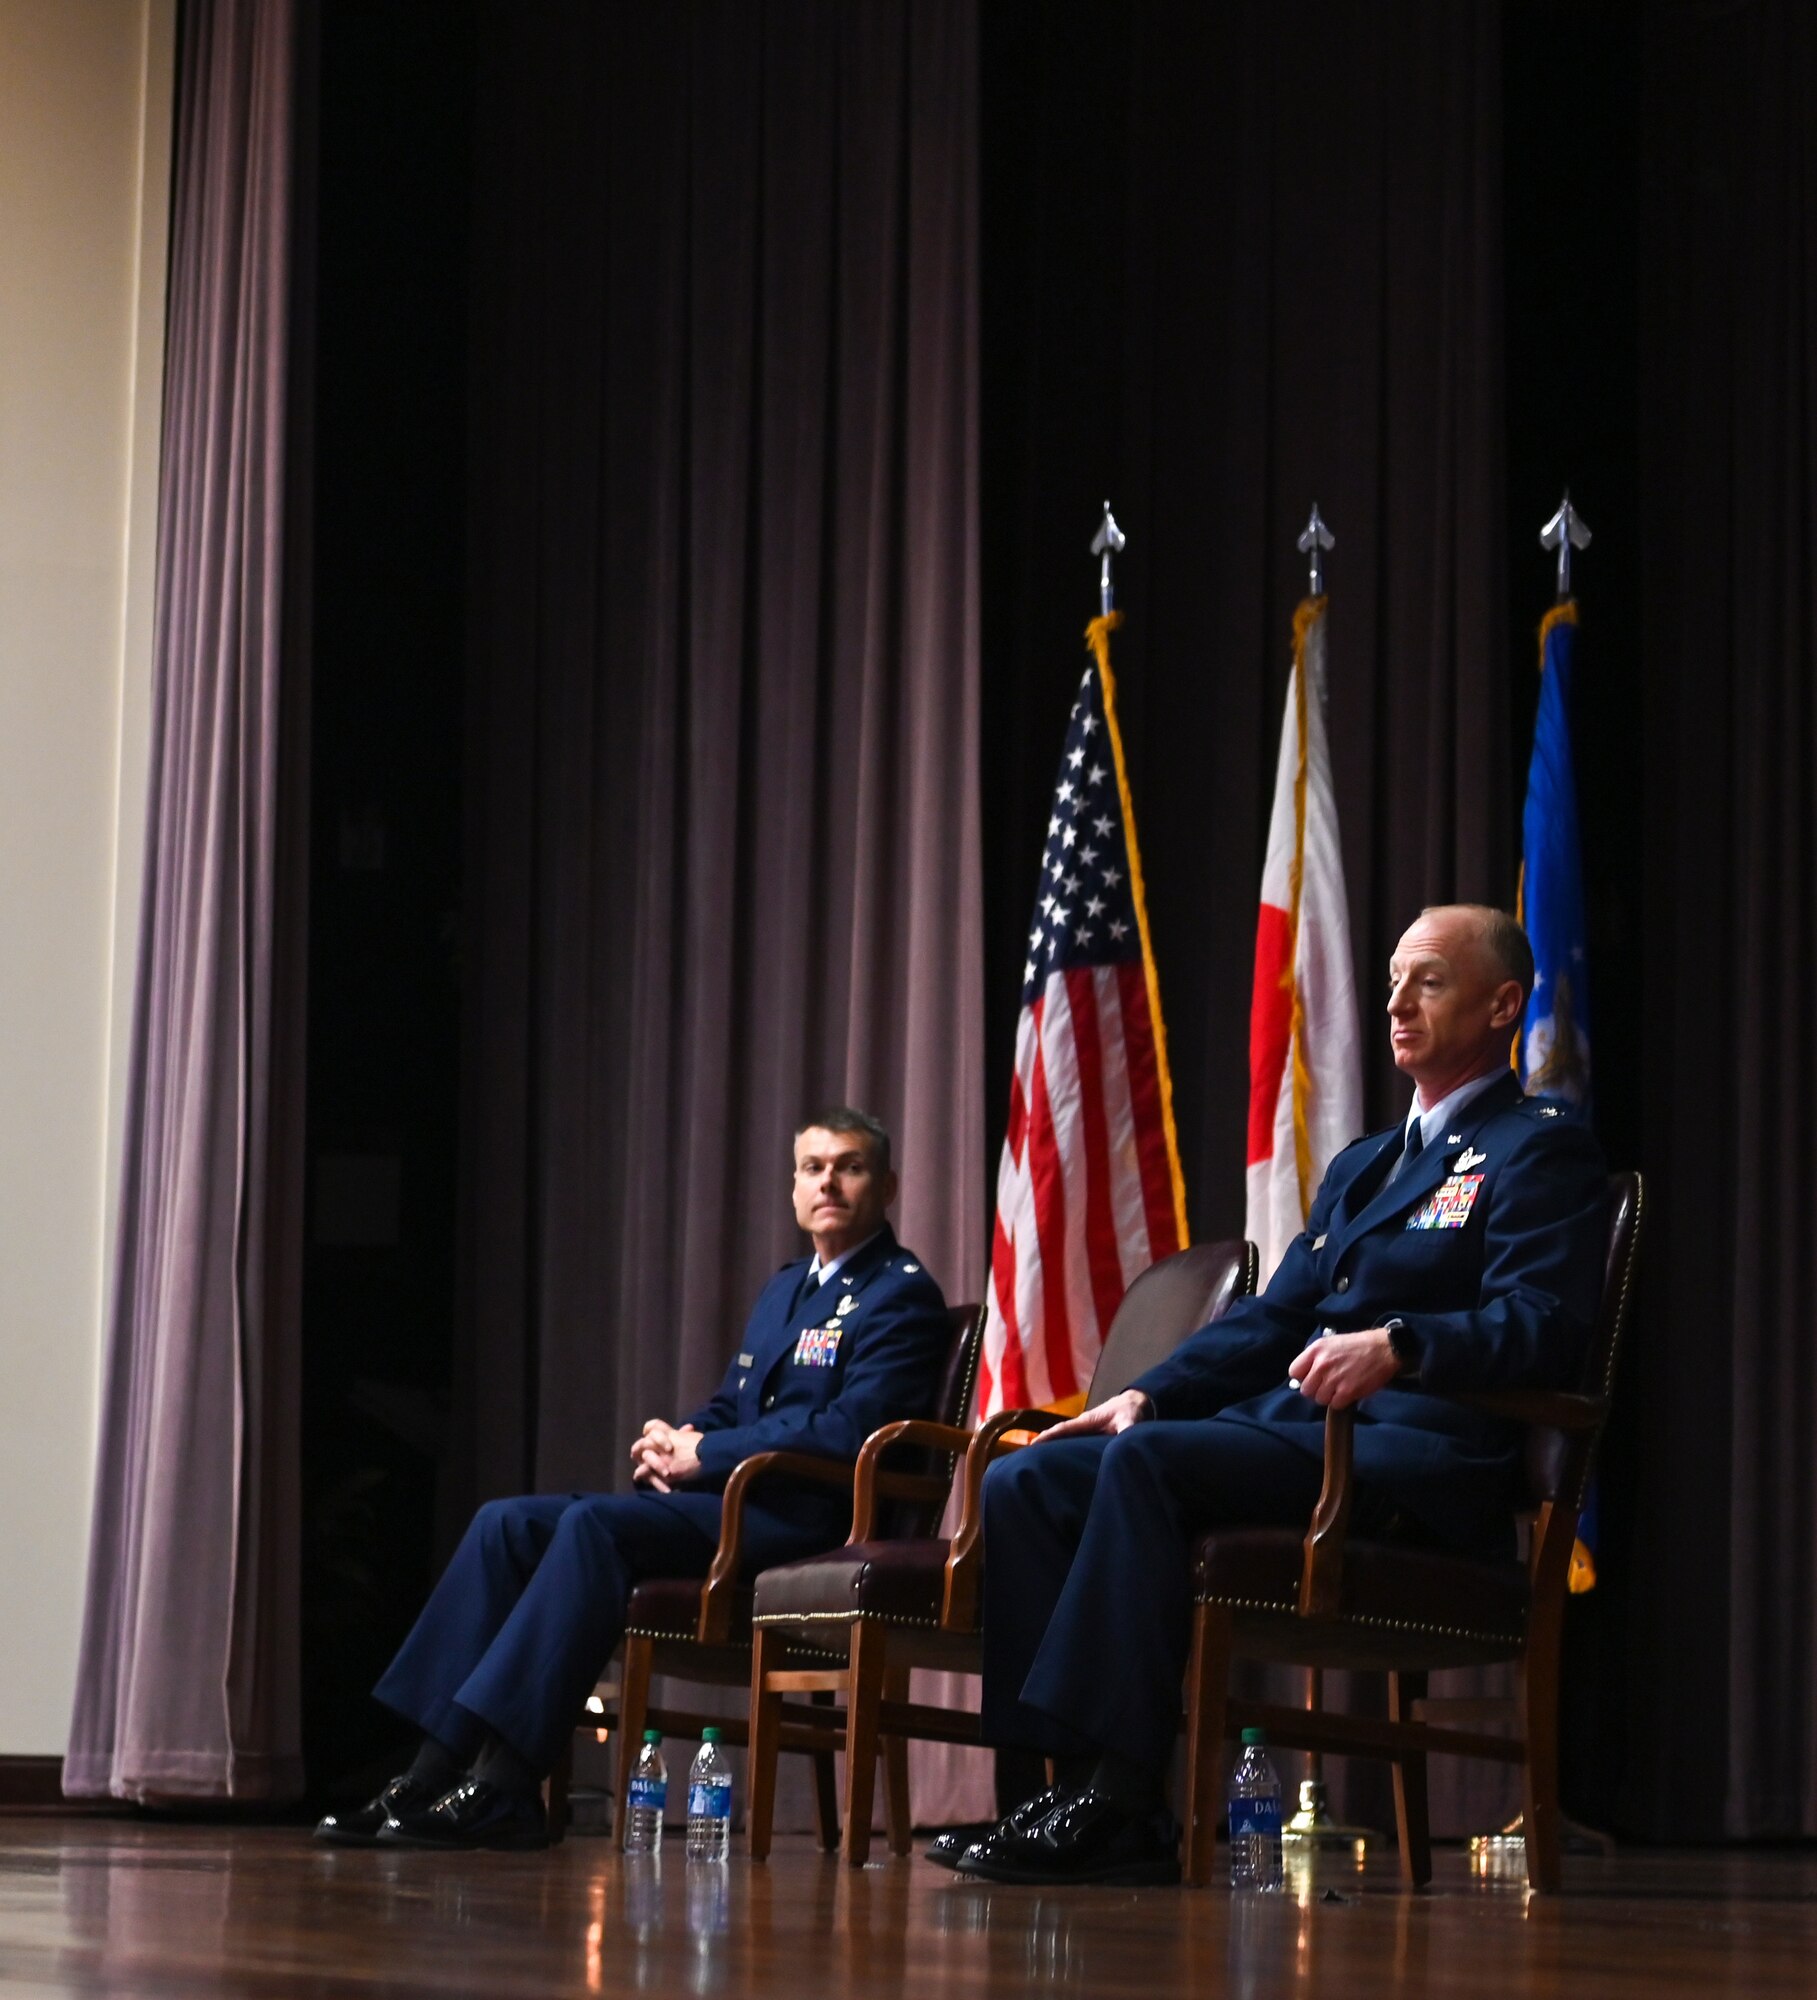 U.S. Air Force Col. Seth Graham (Right), 14th Flying Training Wing commander, and U.S. Air Force Lt. Col. Nathaniel Wilds, 50th Flying Training Squadron commander (Left), sit at Specialized Undergraduate Pilot Training Class 22-06’s graduation on March 4, 2022, at Columbus Air Force Base, Miss. As the 50th FTS commander, Wilds’ squadron is responsible for pilot training in the T-38C Talon. (U.S. Air Force photo by Senior Airman Davis Donaldson)